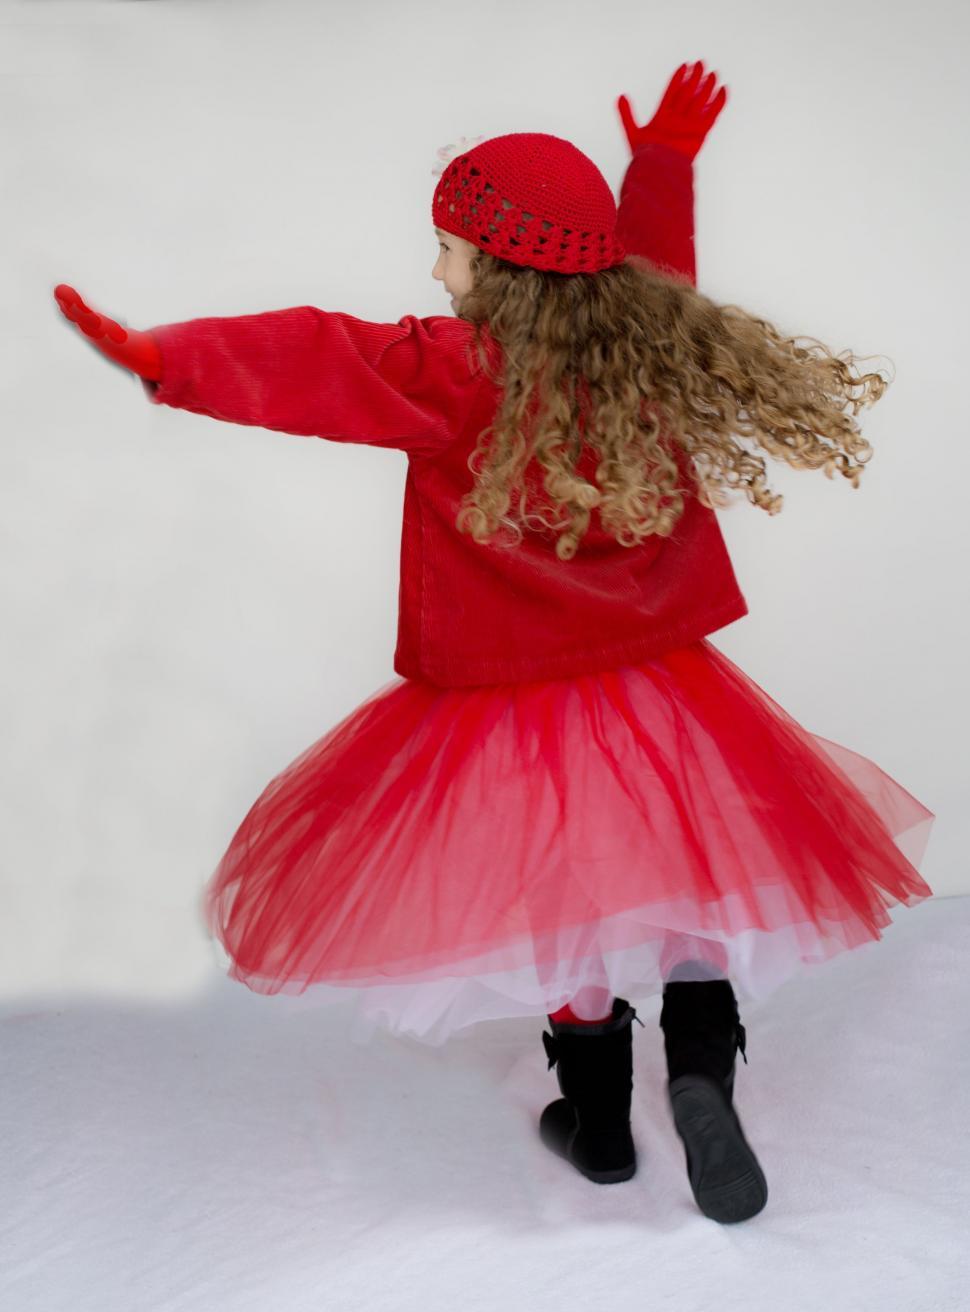 Free Image of Little Girl in red tutu dress  